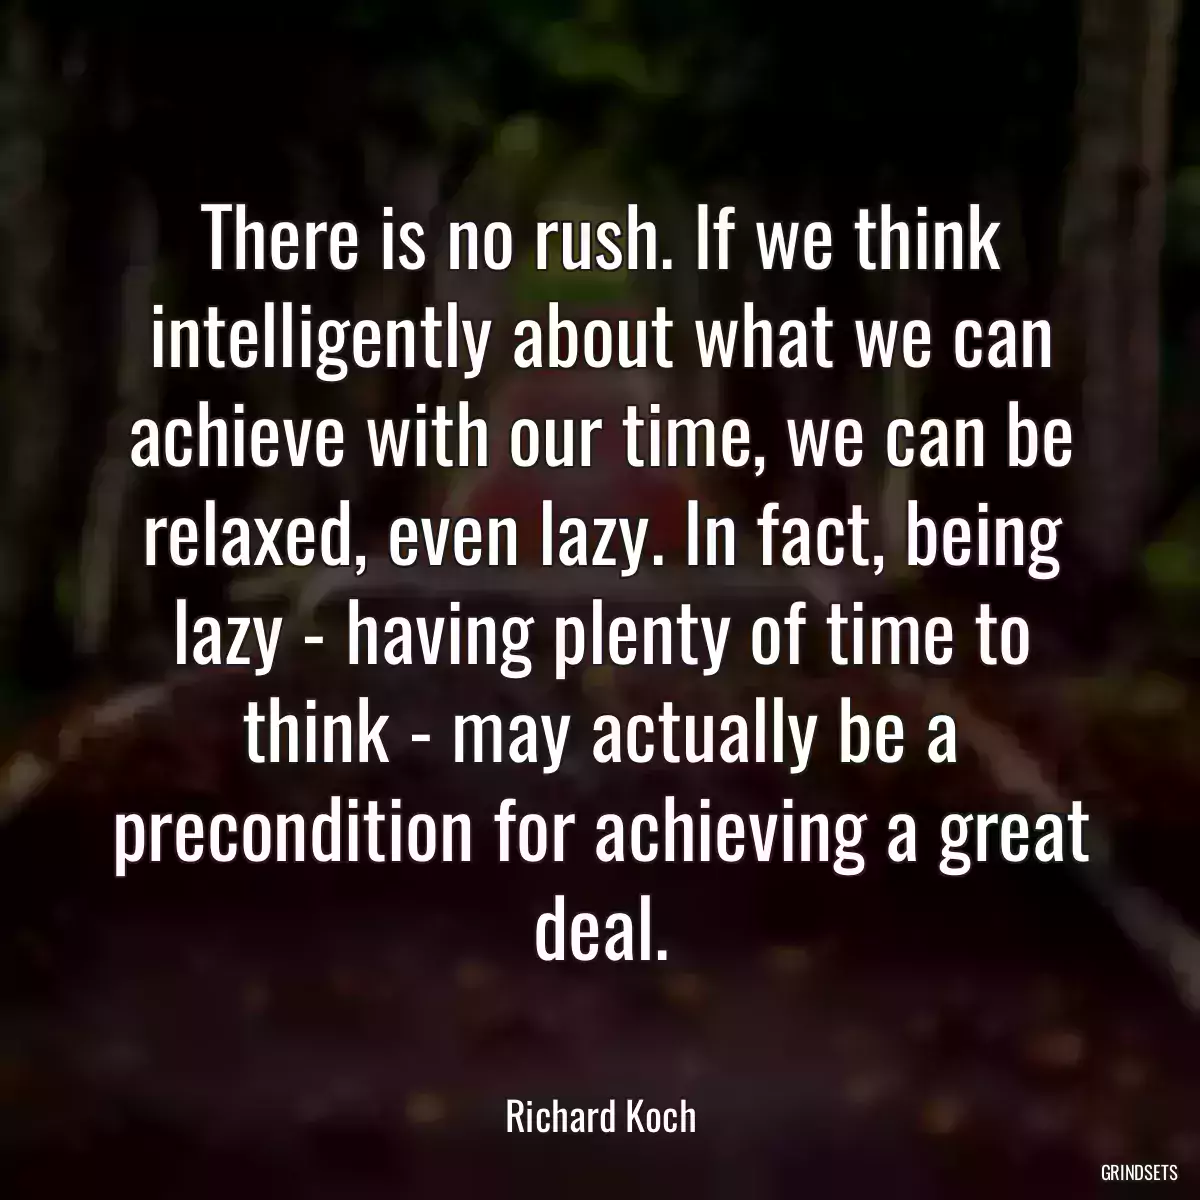 There is no rush. If we think intelligently about what we can achieve with our time, we can be relaxed, even lazy. In fact, being lazy - having plenty of time to think - may actually be a precondition for achieving a great deal.